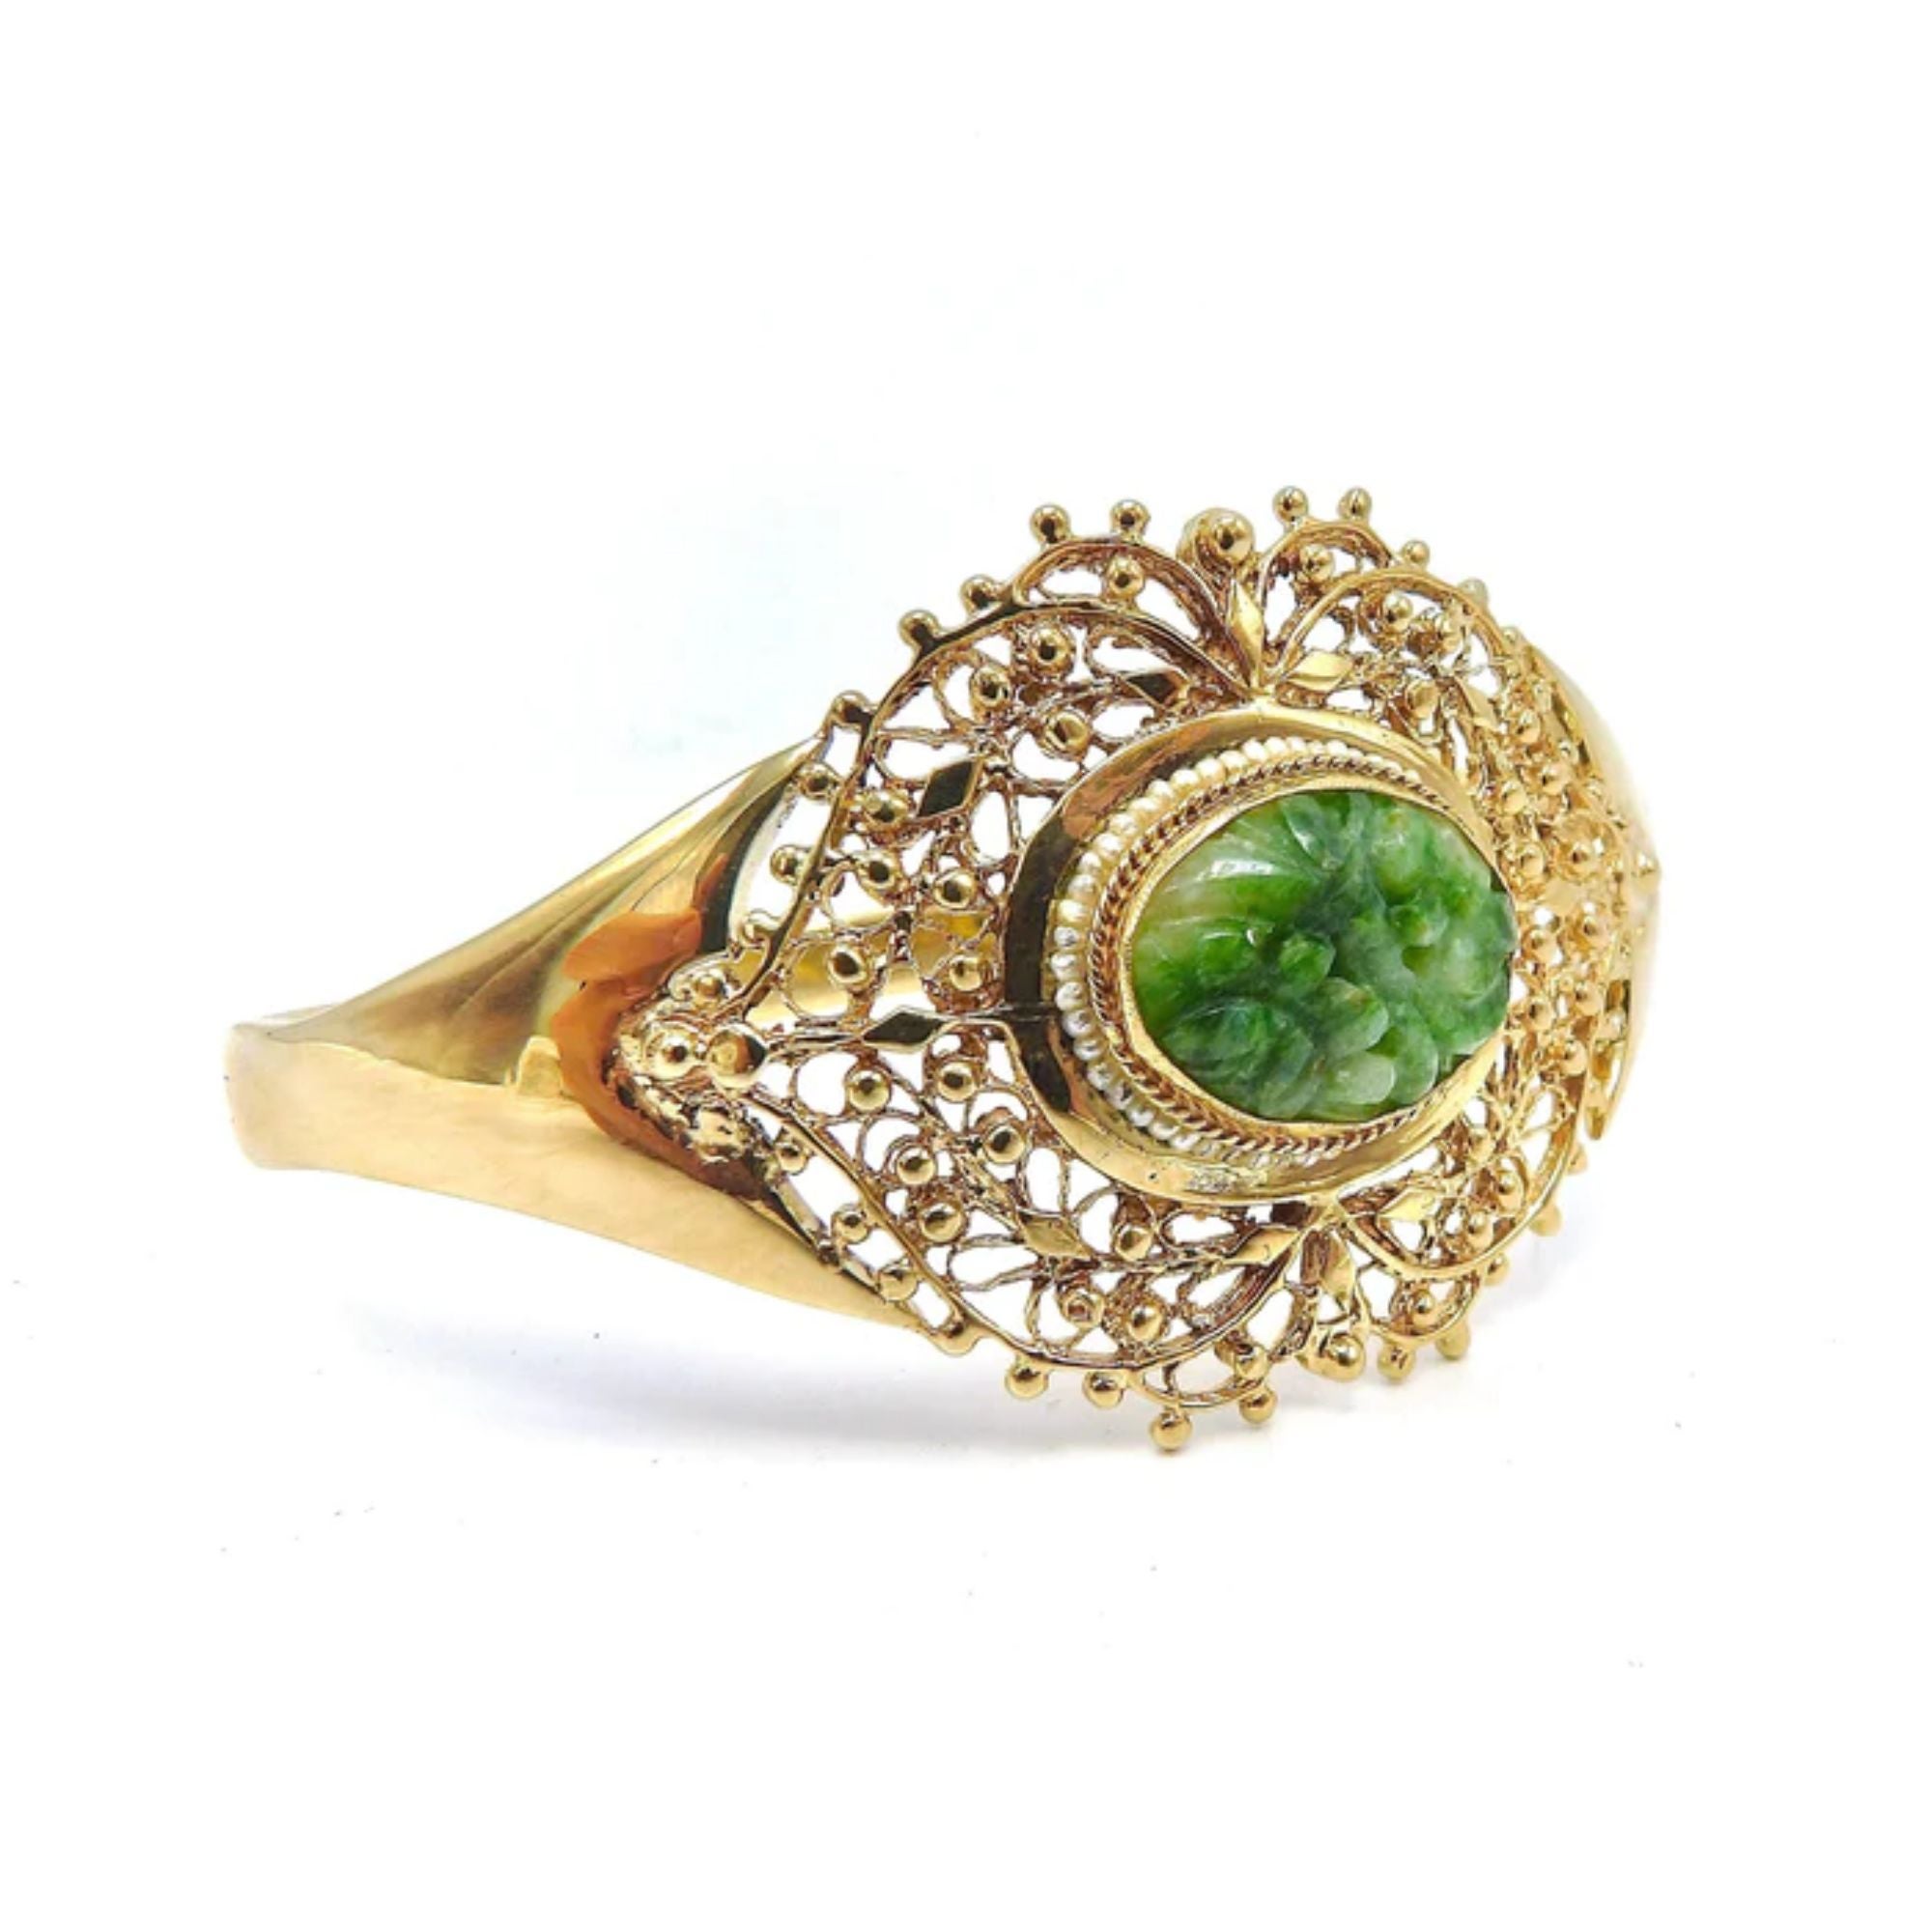 This elegant bracelet is made of 14k gold and decorated with a central reticulated piece of green jade. The center jade piece protrudes about a 1/4 of an inch from the gold setting and is carved with flower patterns. A lovely ring of seed pearls